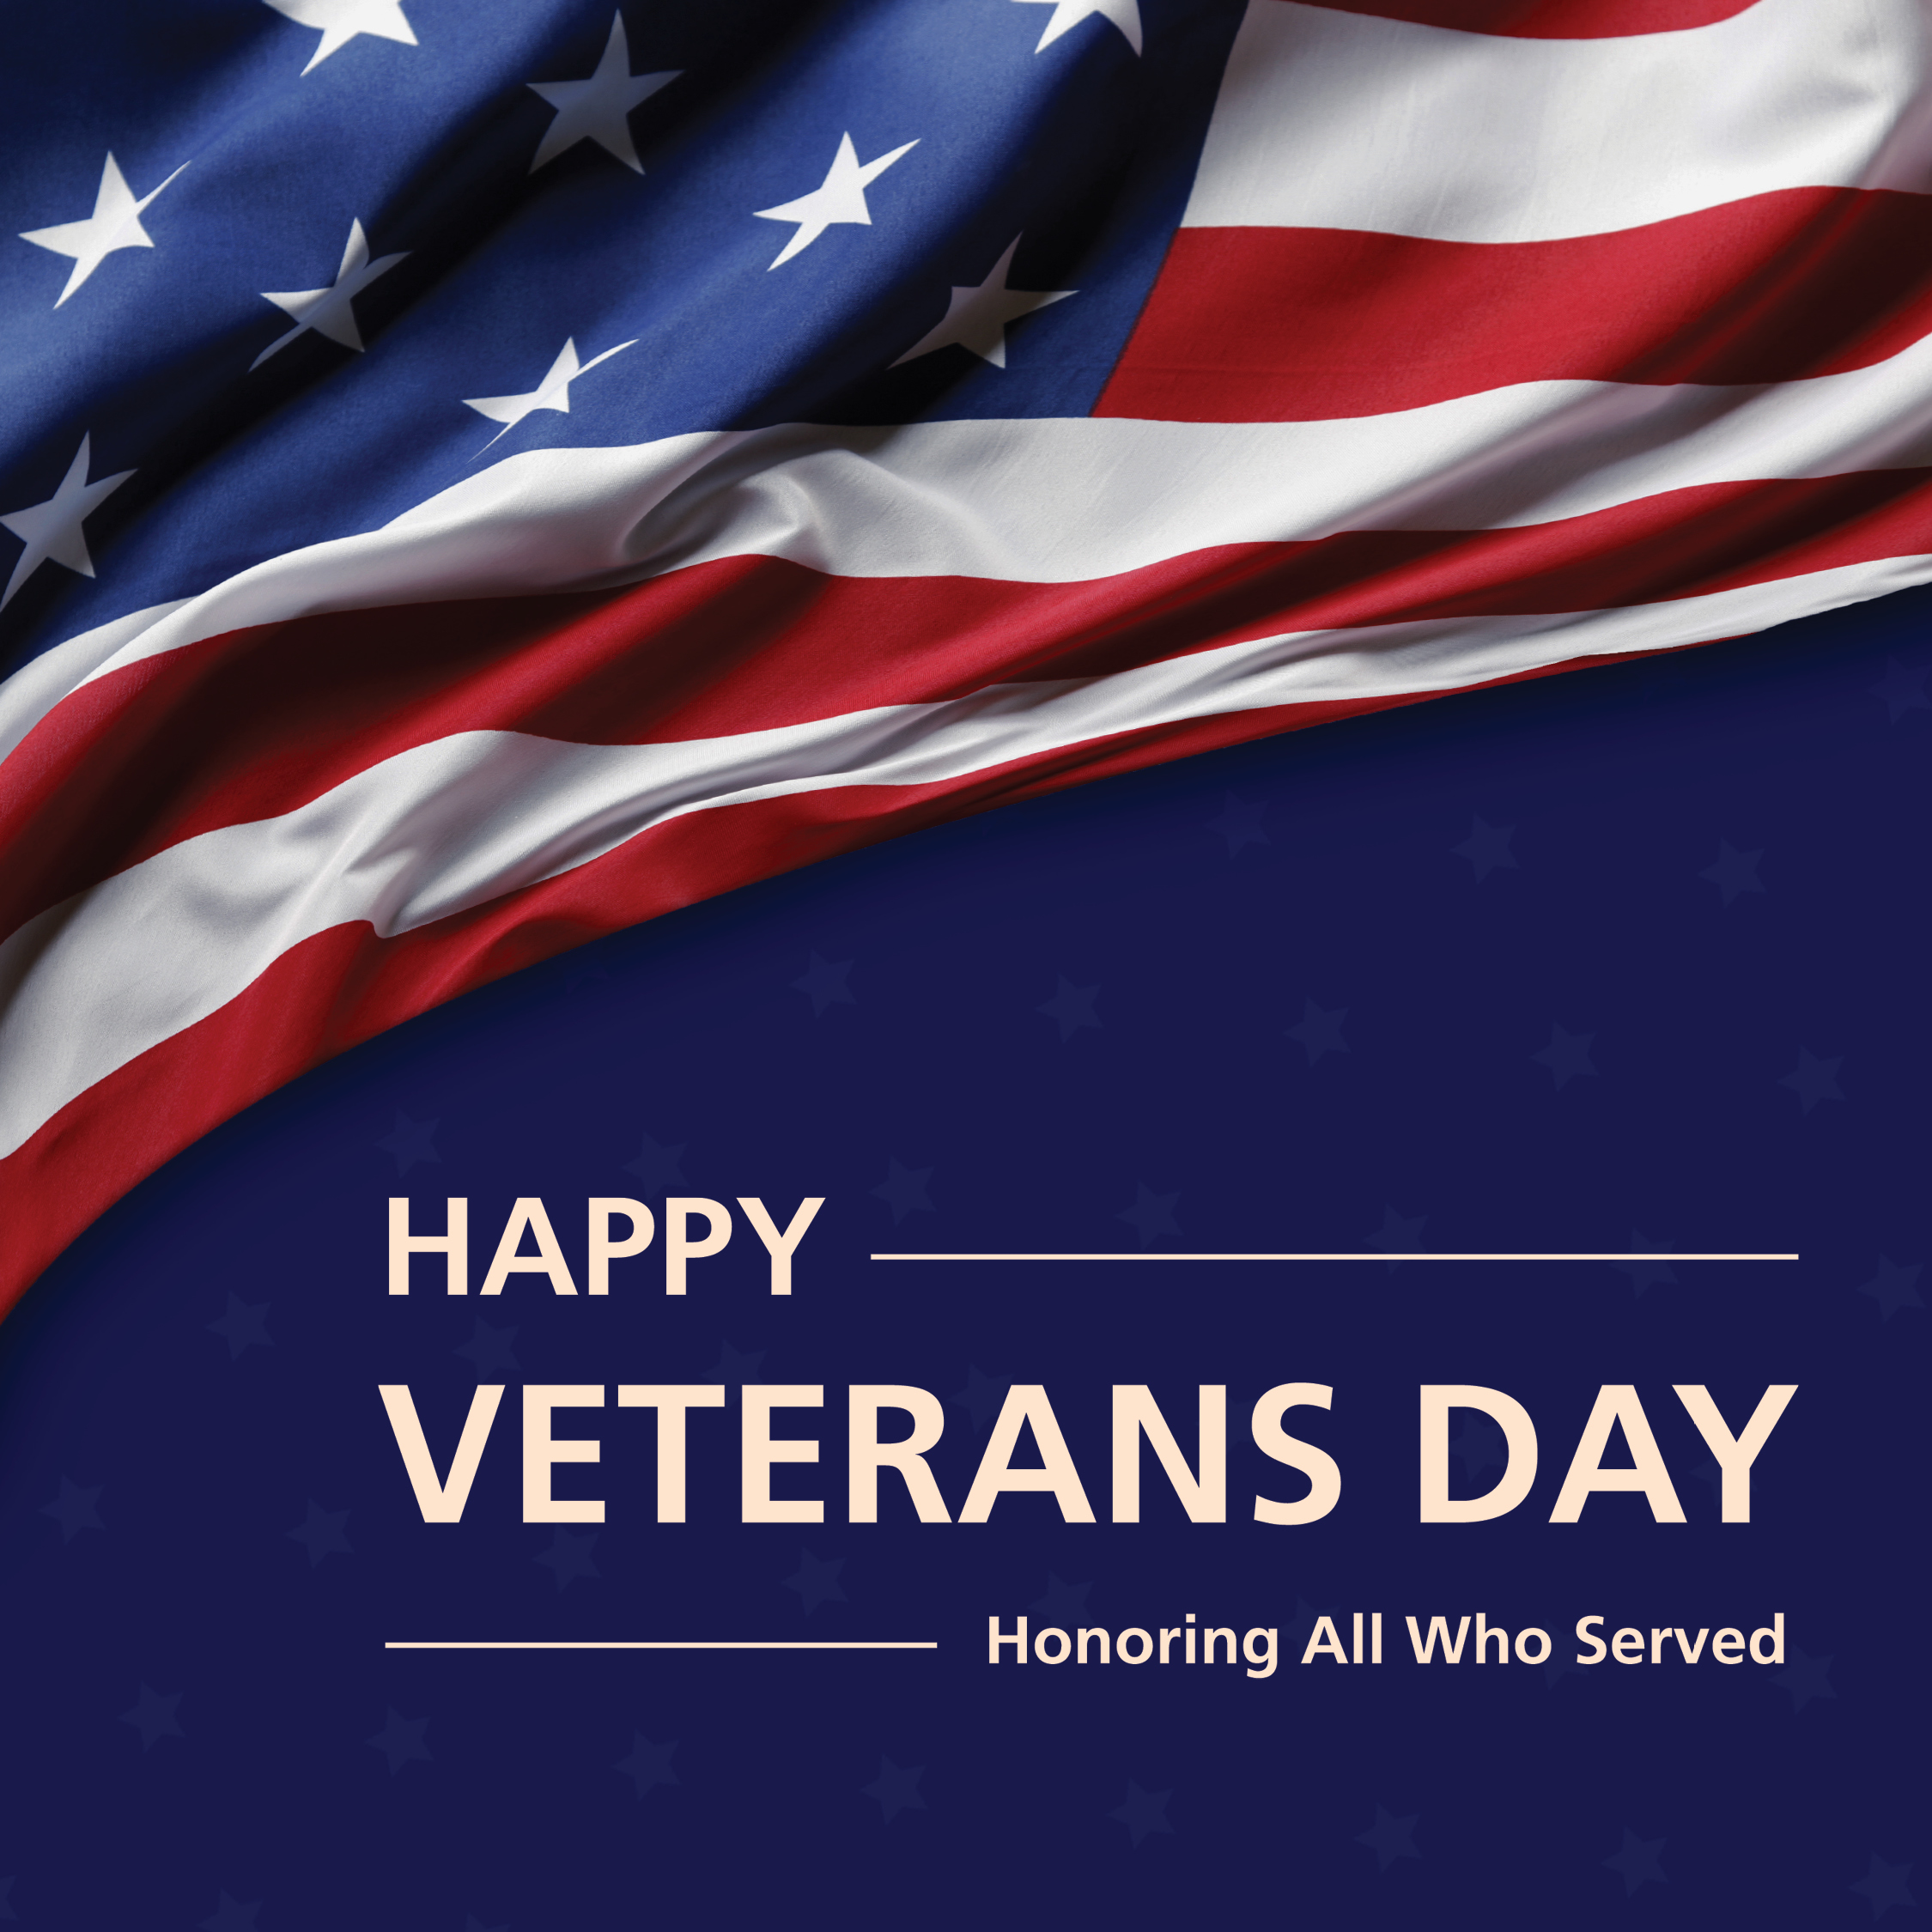 Happy Veterans Day. Honoring All Who Served.